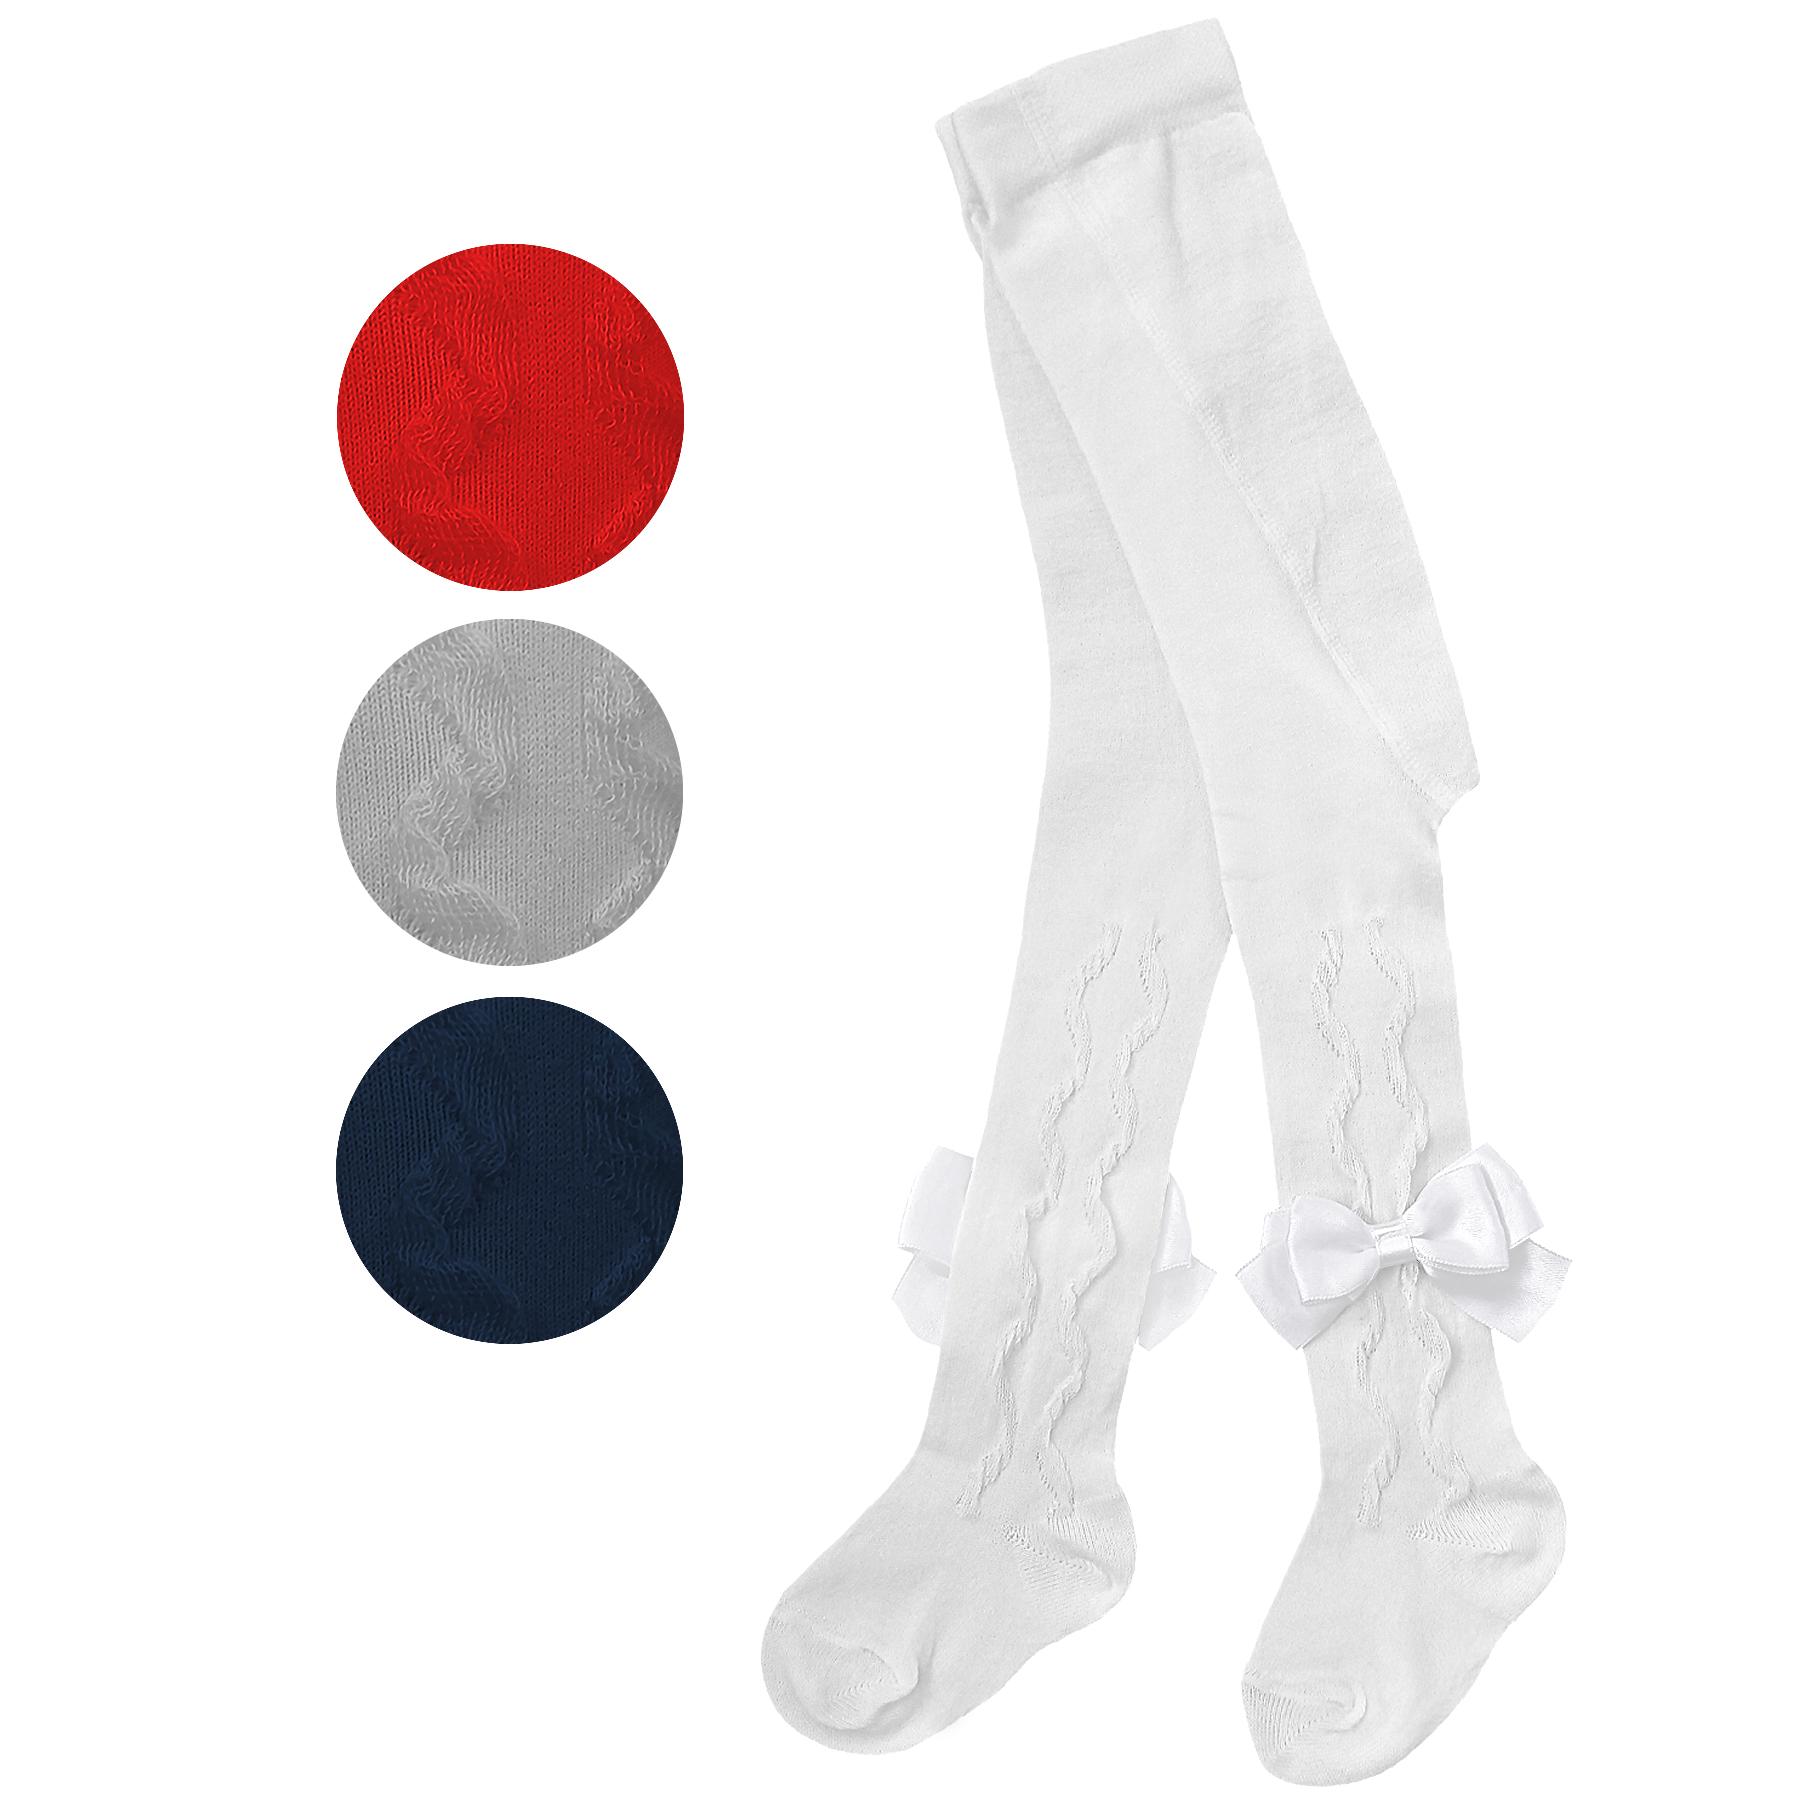 Pex Kids Grazia Tights with Side Ruffles & Bows Colour Chart